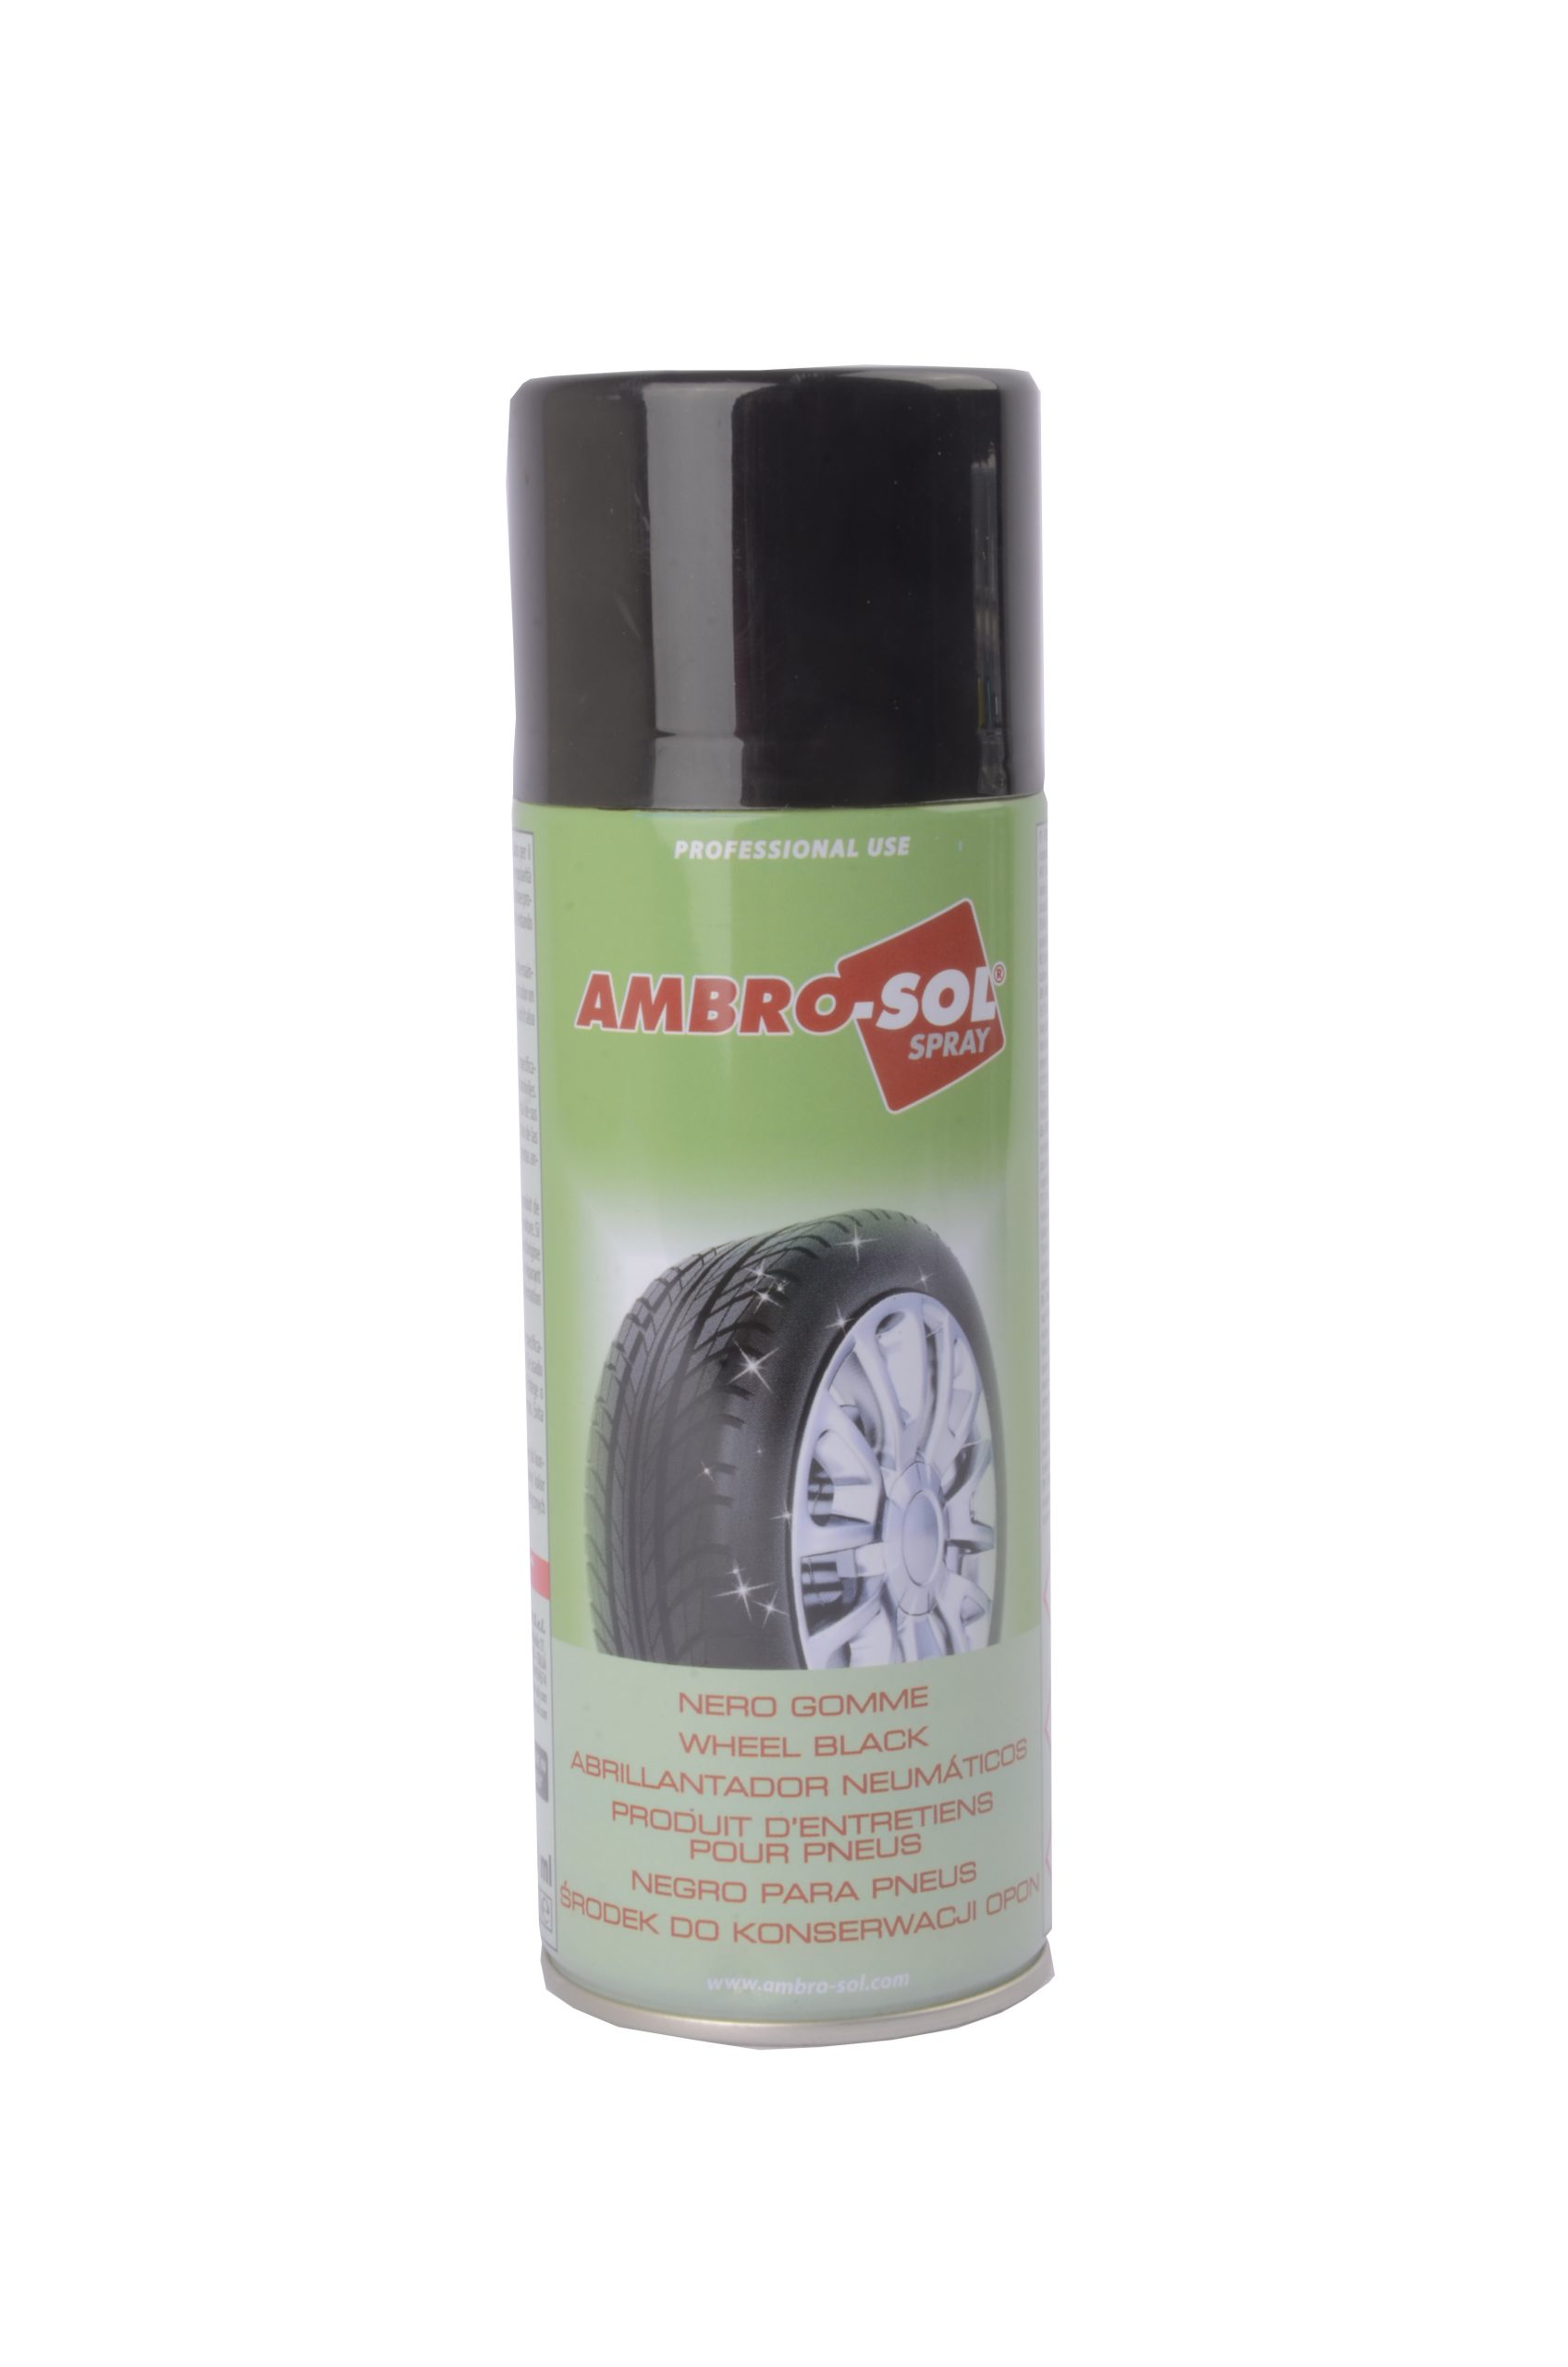 Ambrosol 
	
	Wheel Black/Tires Polish
	 |  Hardware and Tools |  Vehicle Cleaning |  Industrial Sprays |  Vehicle Supplies